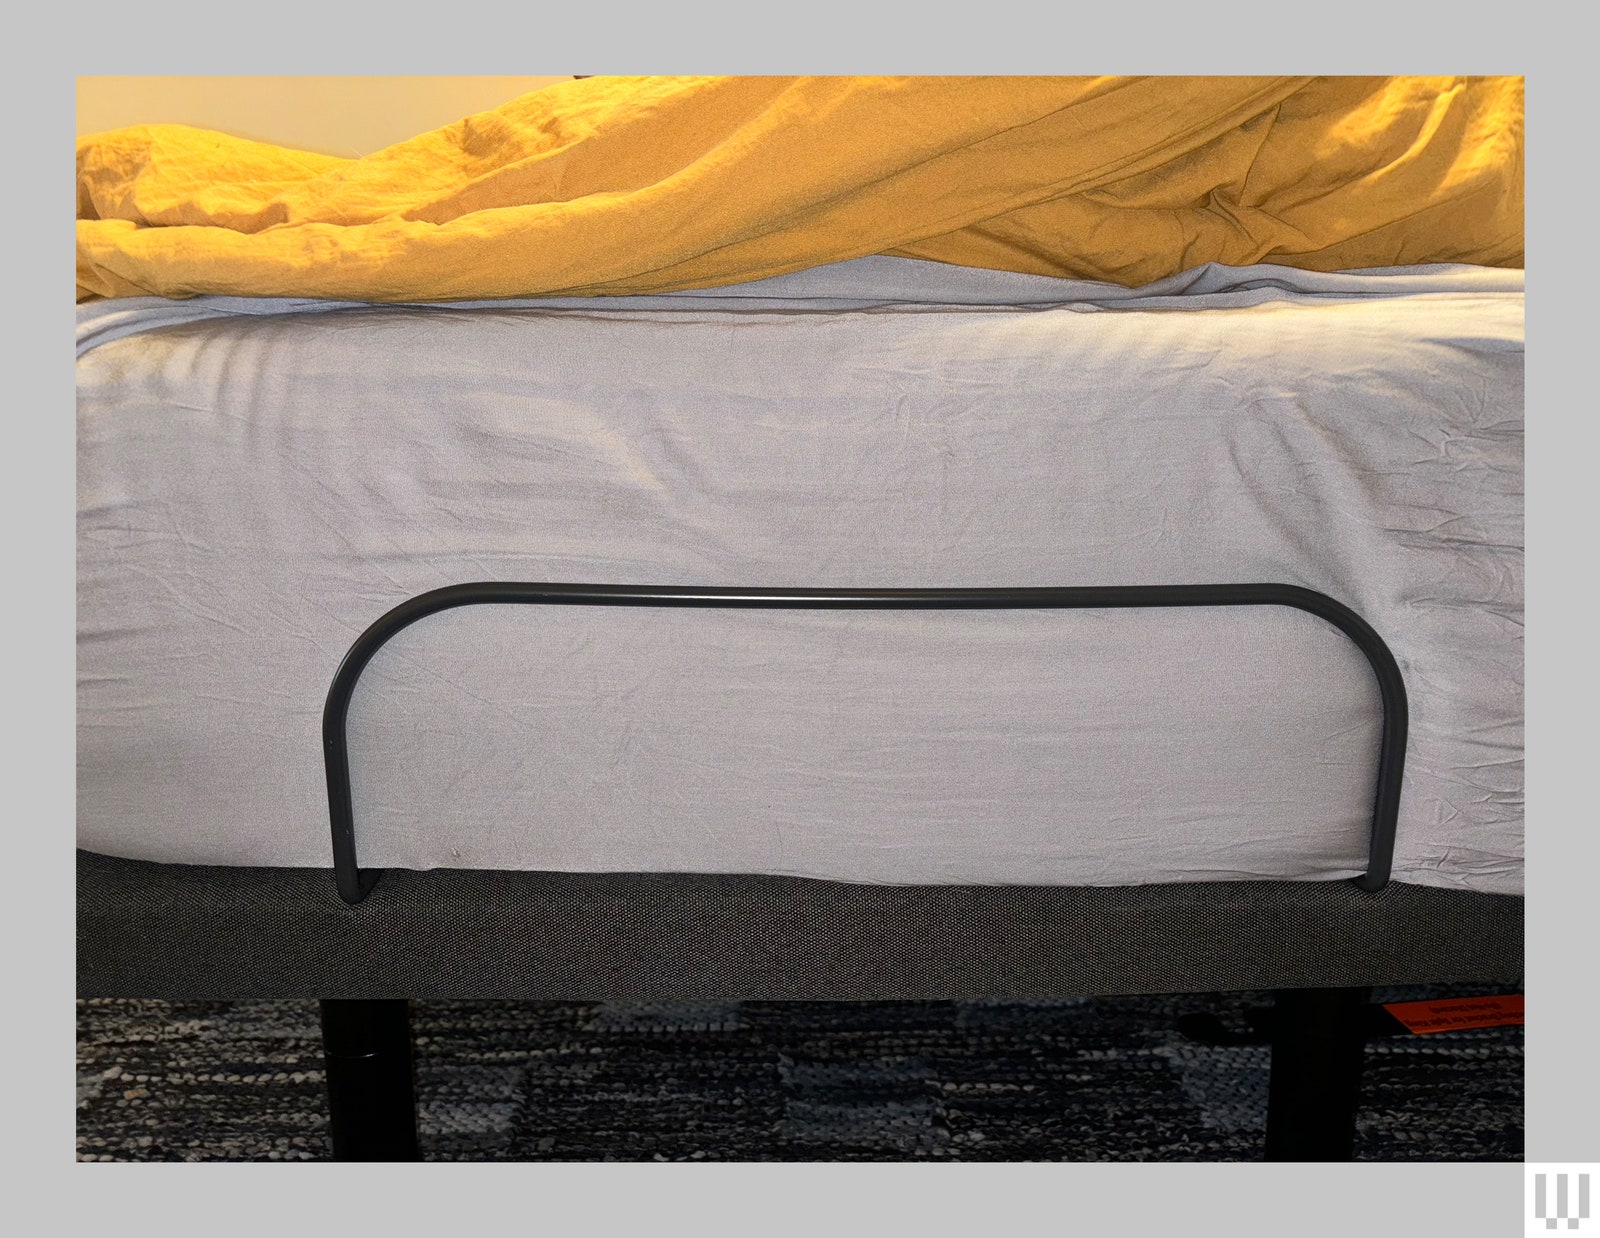 Side view of a thick mattress with a curved metal bar pressed to the side as part of the bed frame